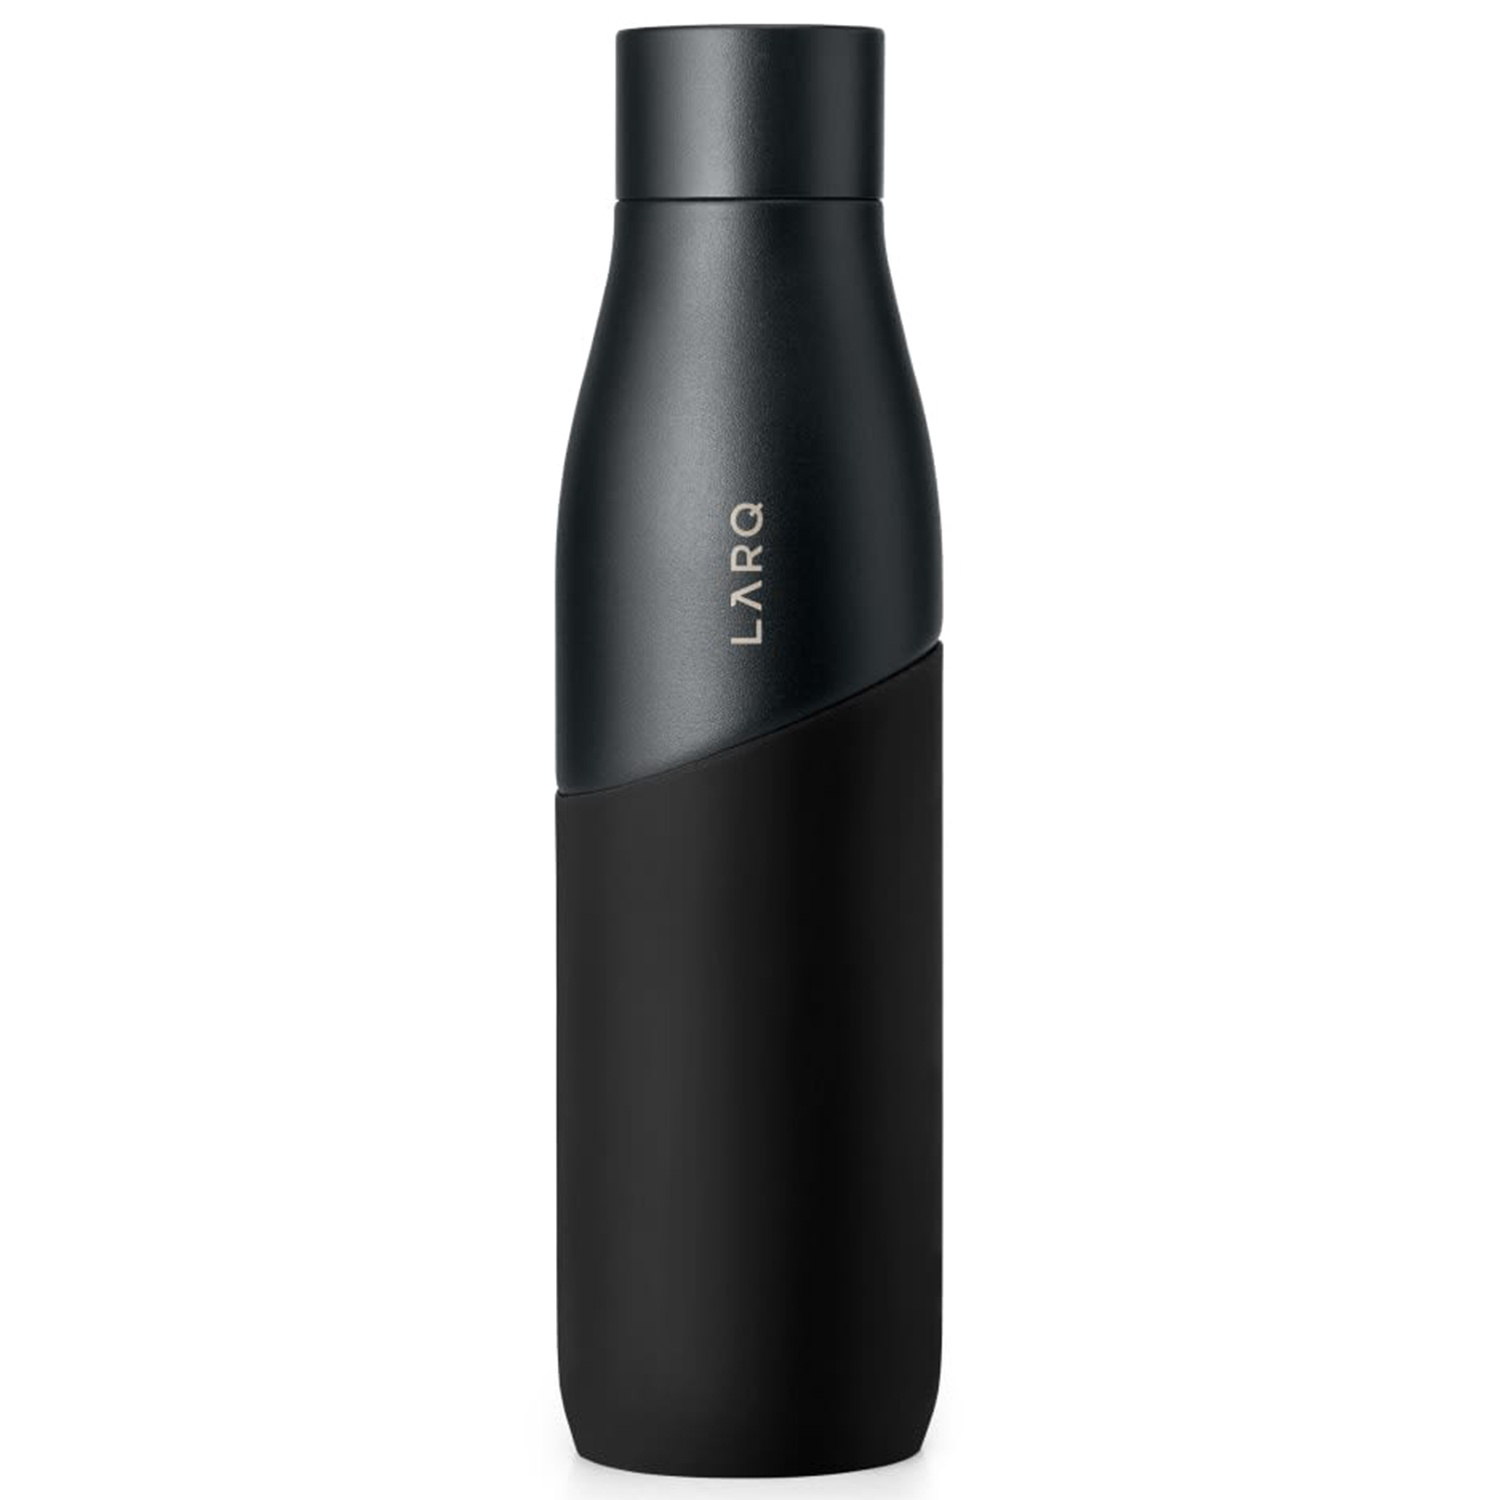 LARQ Bottle Movement PureVis - Lightweight Self-Cleaning and Non-Insulated  Stainless Steel Water Bottle with UV Water Sanitizer, 32oz, Black/Onyx